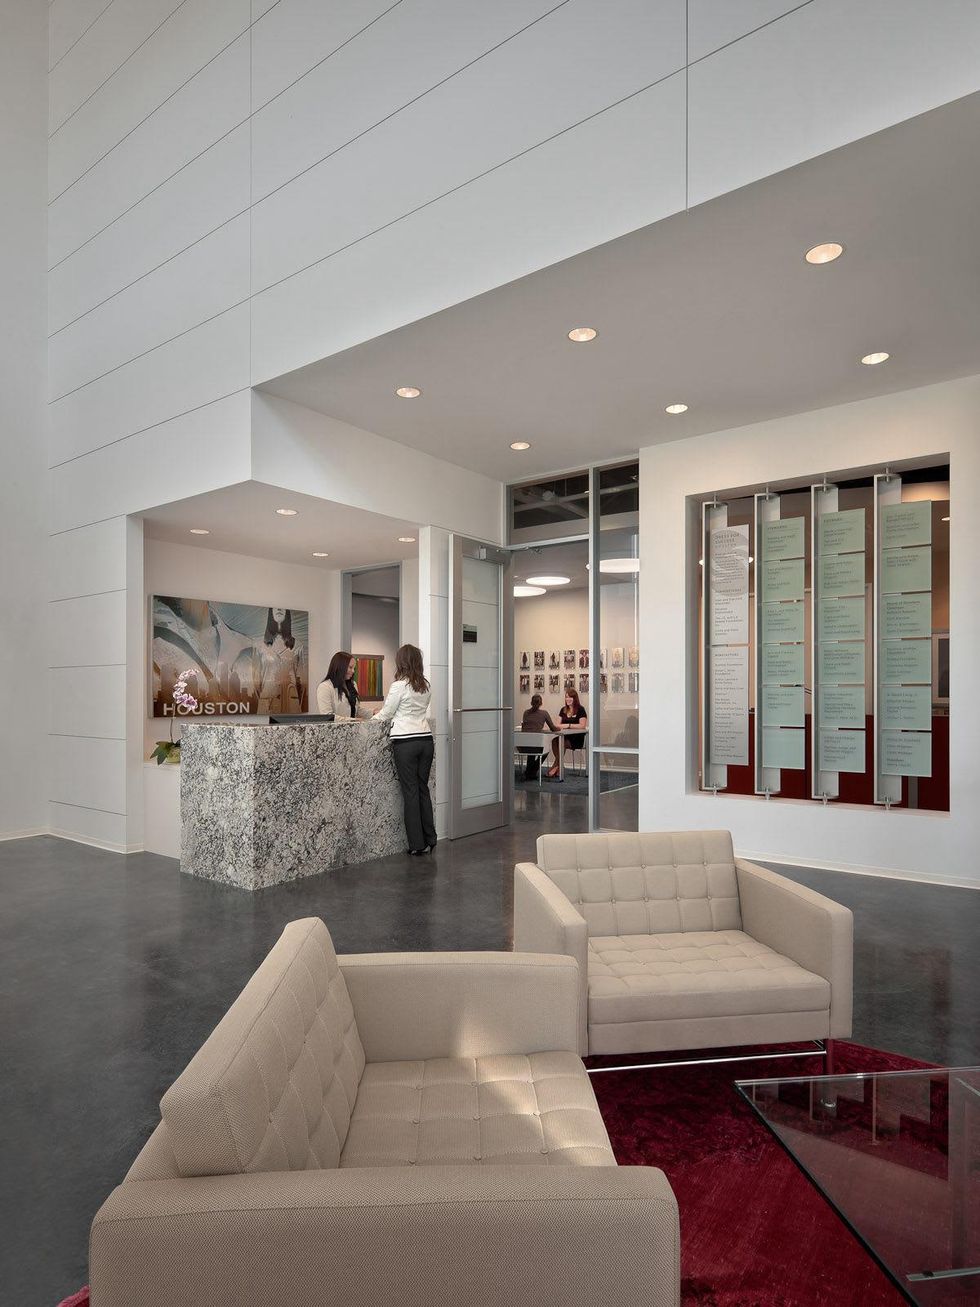 Houston Dress for Success new building May 2013 lobby